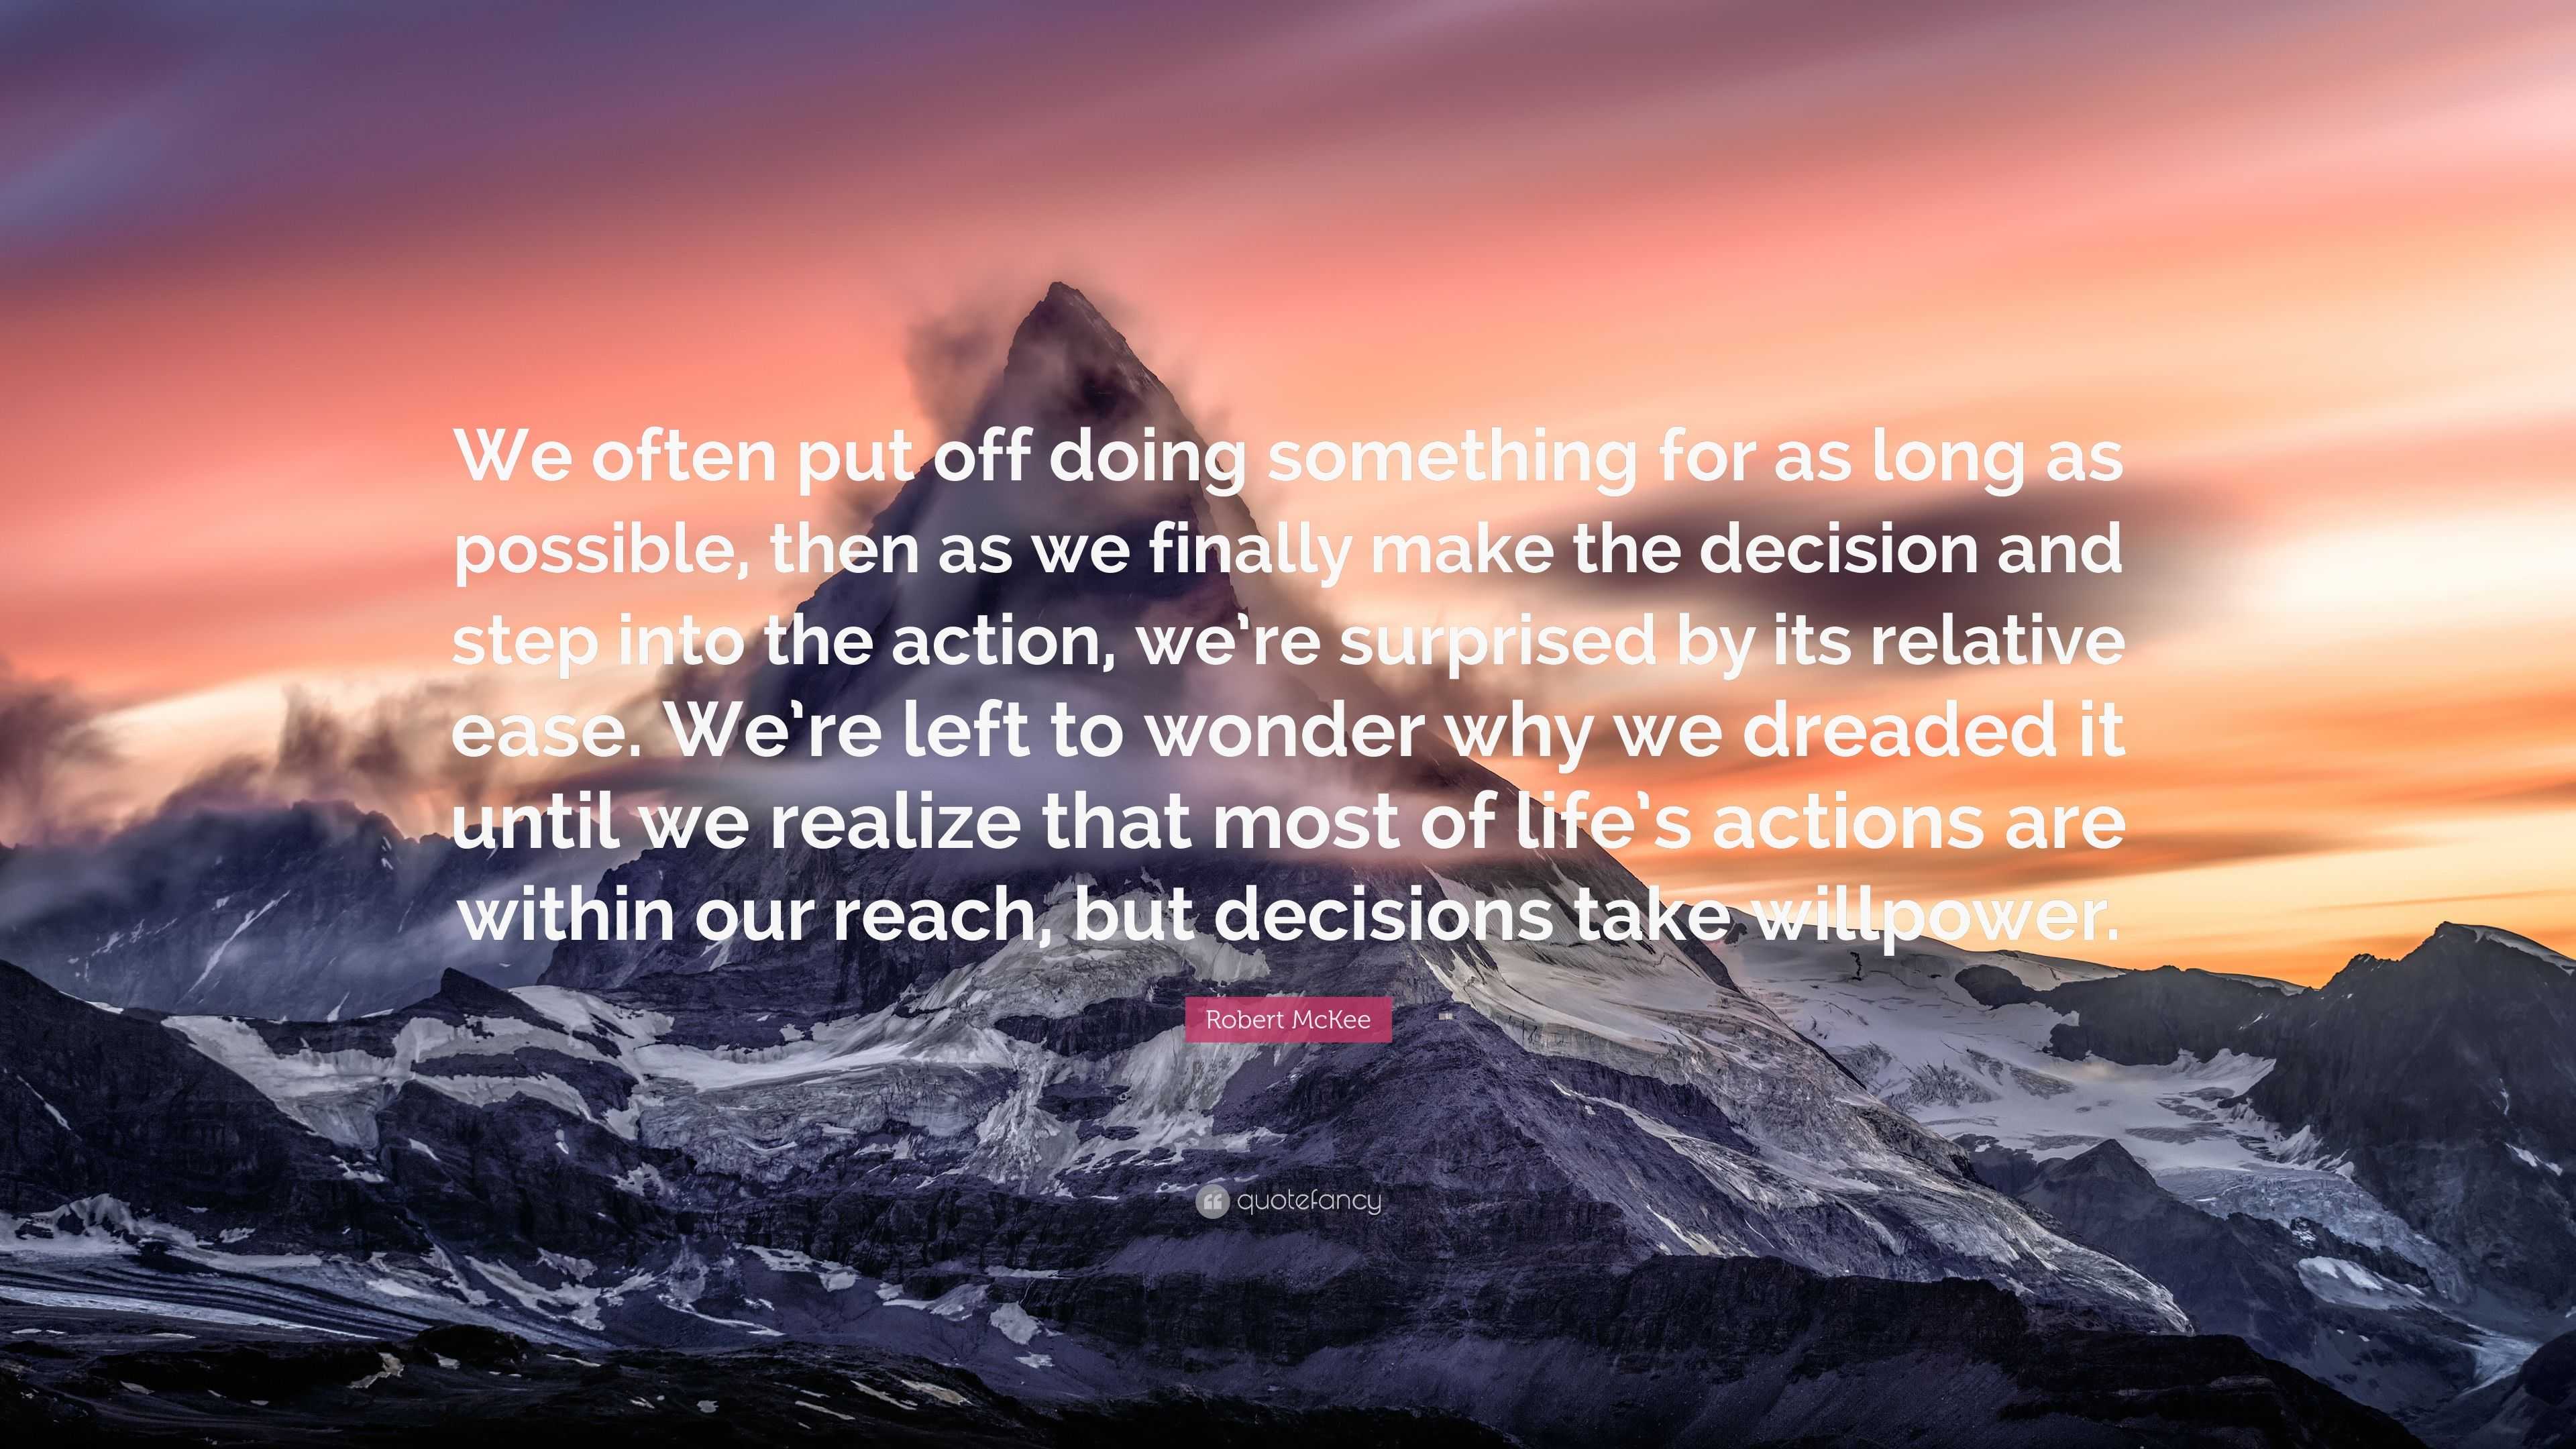 Robert McKee Quote: “We often put off doing something for as long as ...